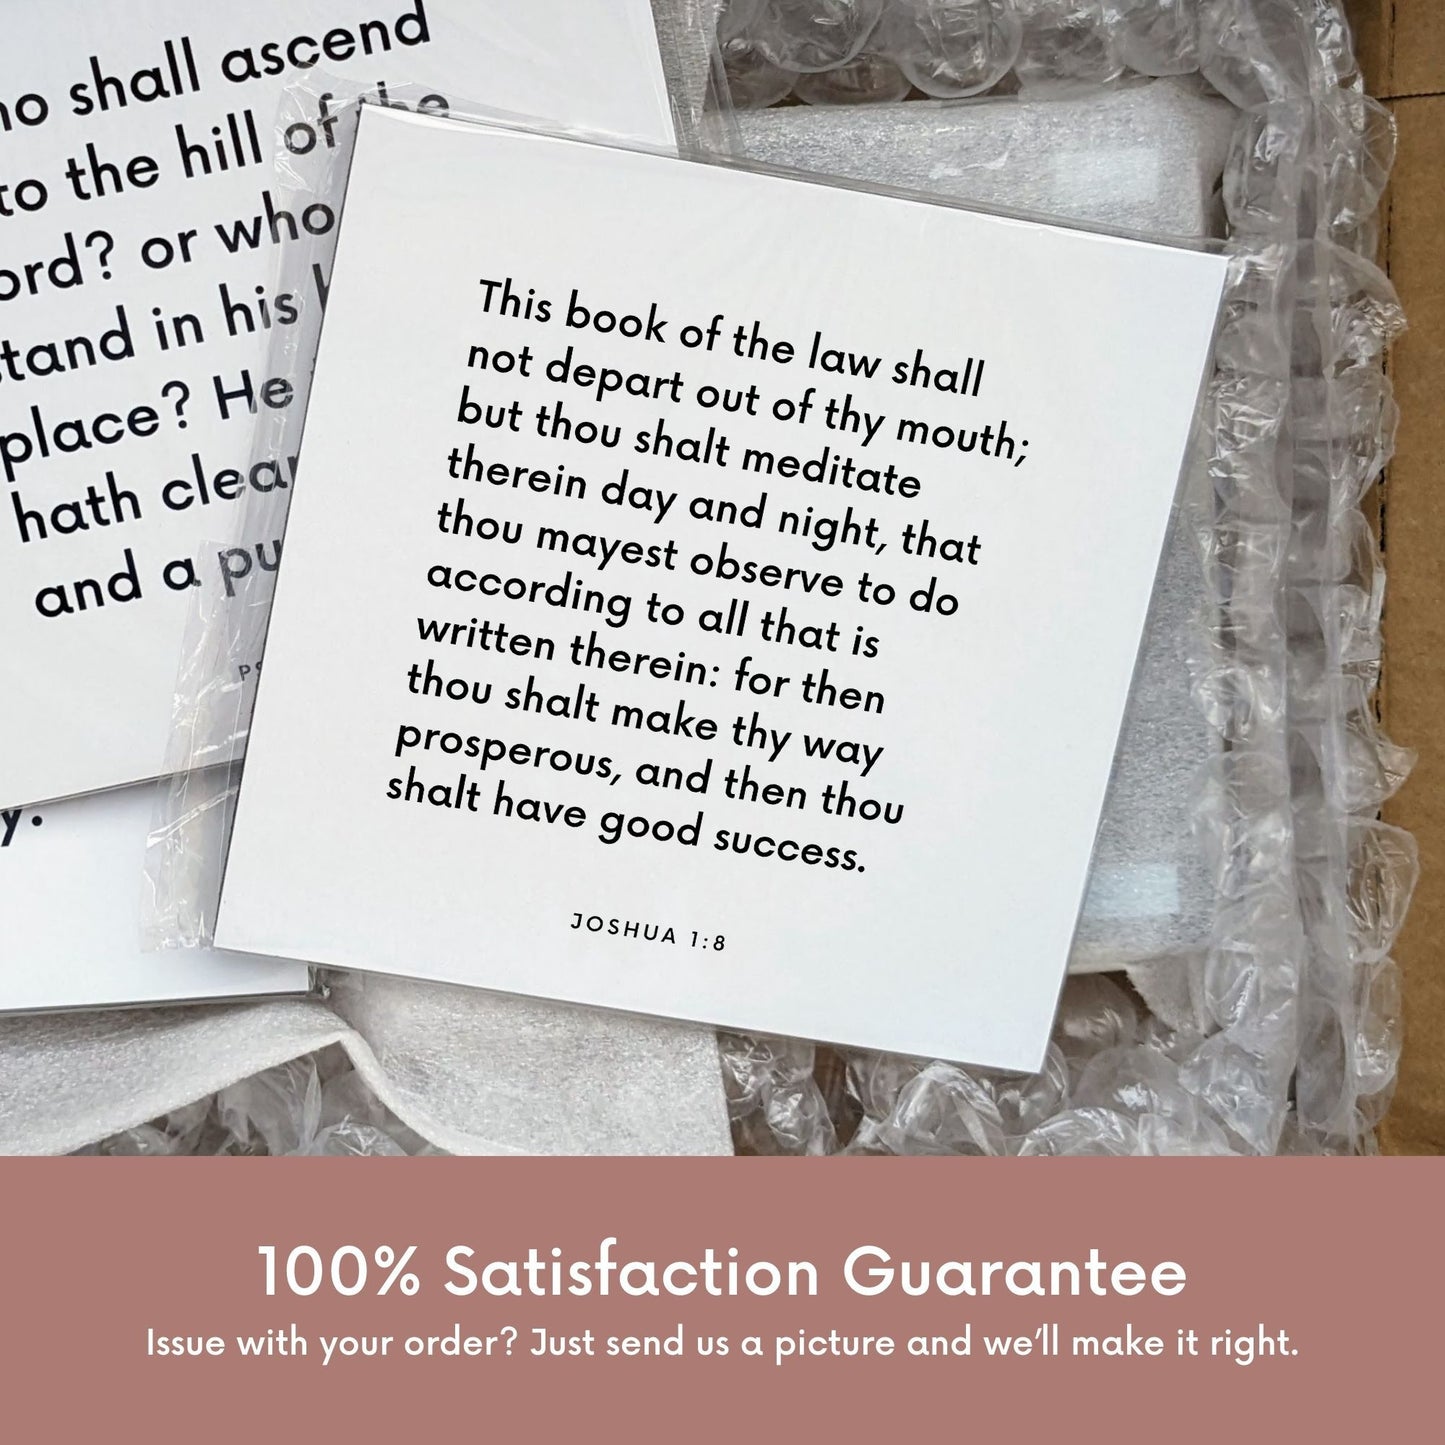 Shipping materials for scripture tile of Joshua 1:8 - "Thou shalt meditate therein day and night"